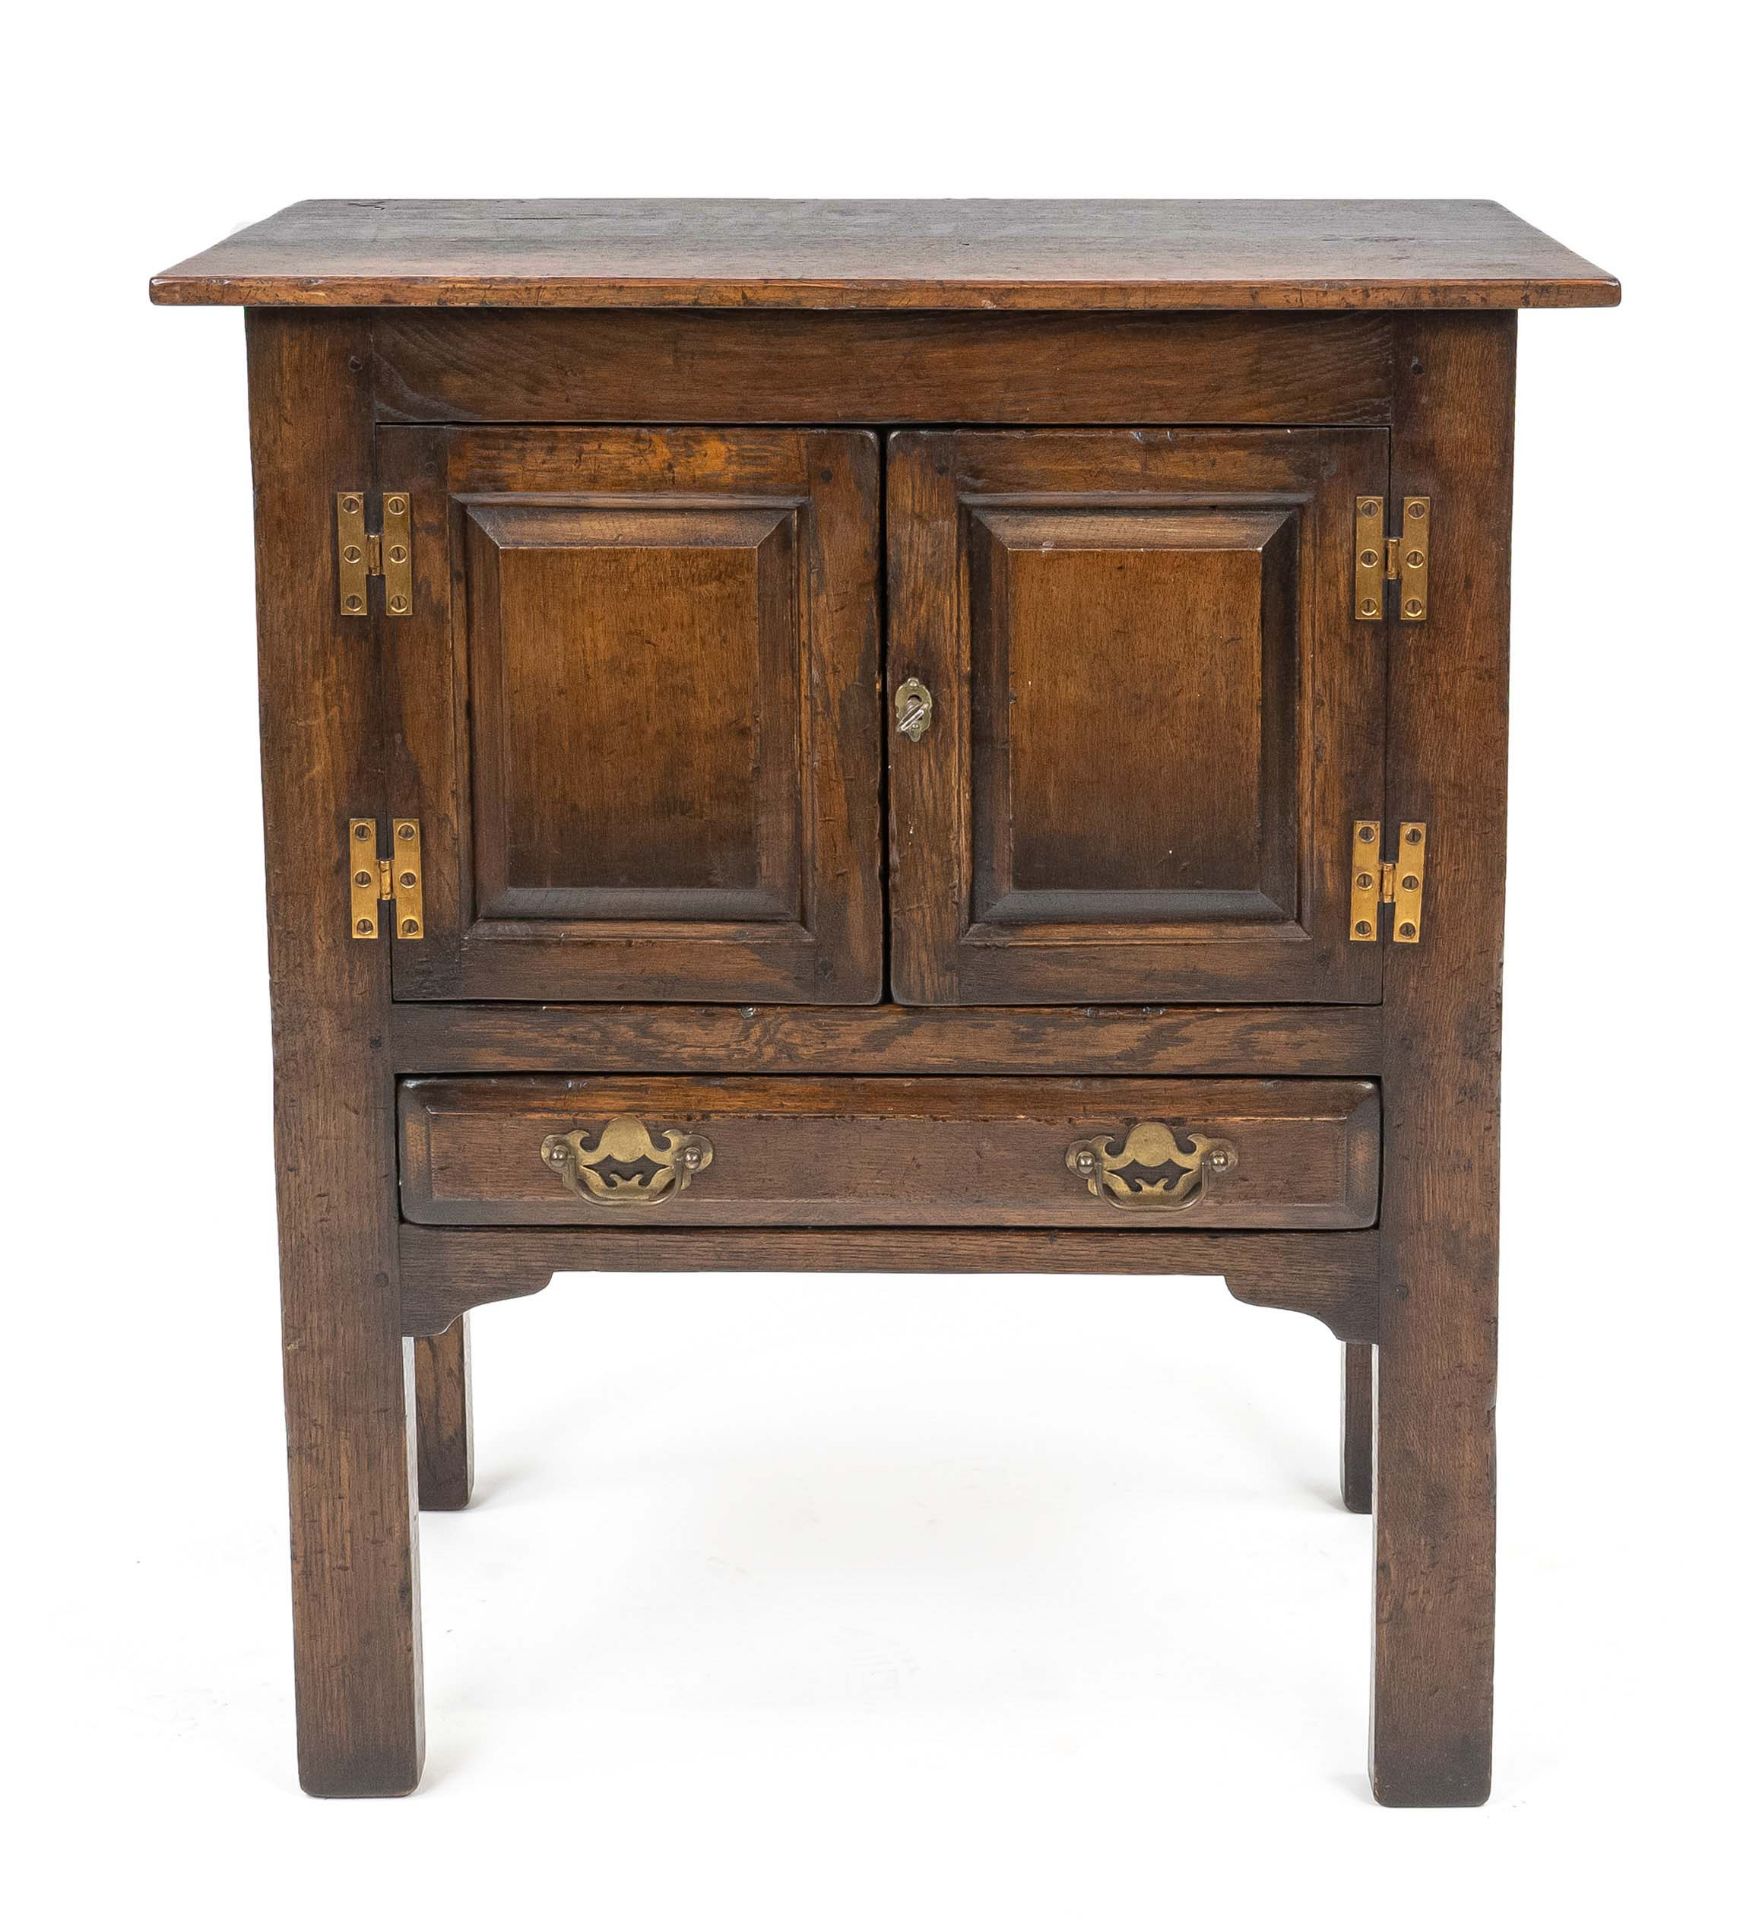 English side cabinet, 18th century, solid oak, 2-door corpus with drawer standing on high legs,